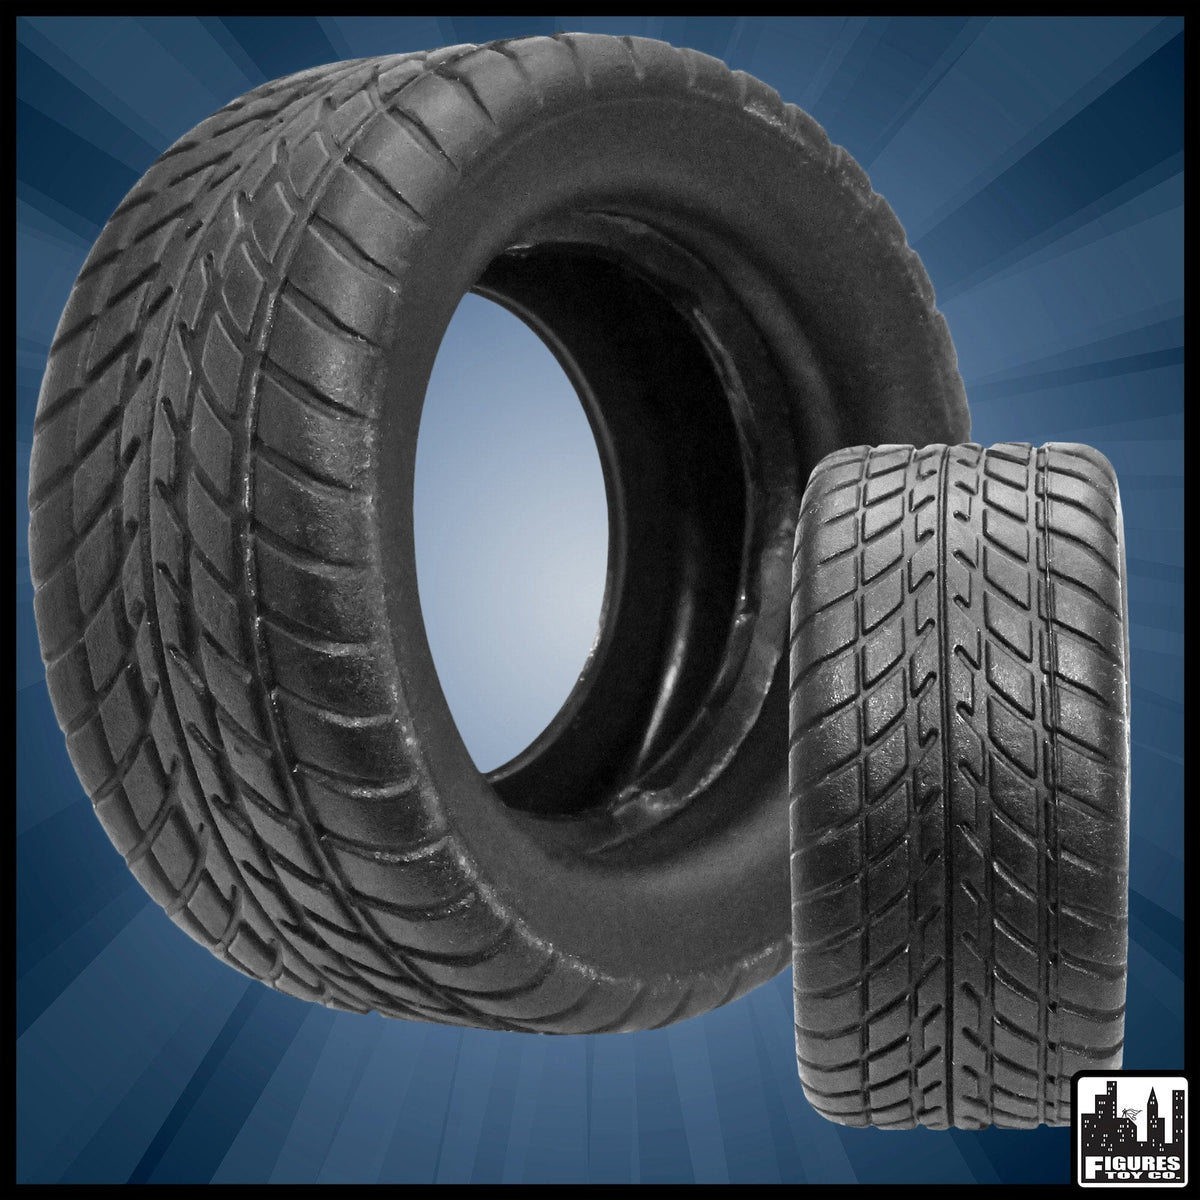 Plastic Tire for WWE Wrestling Action Figures